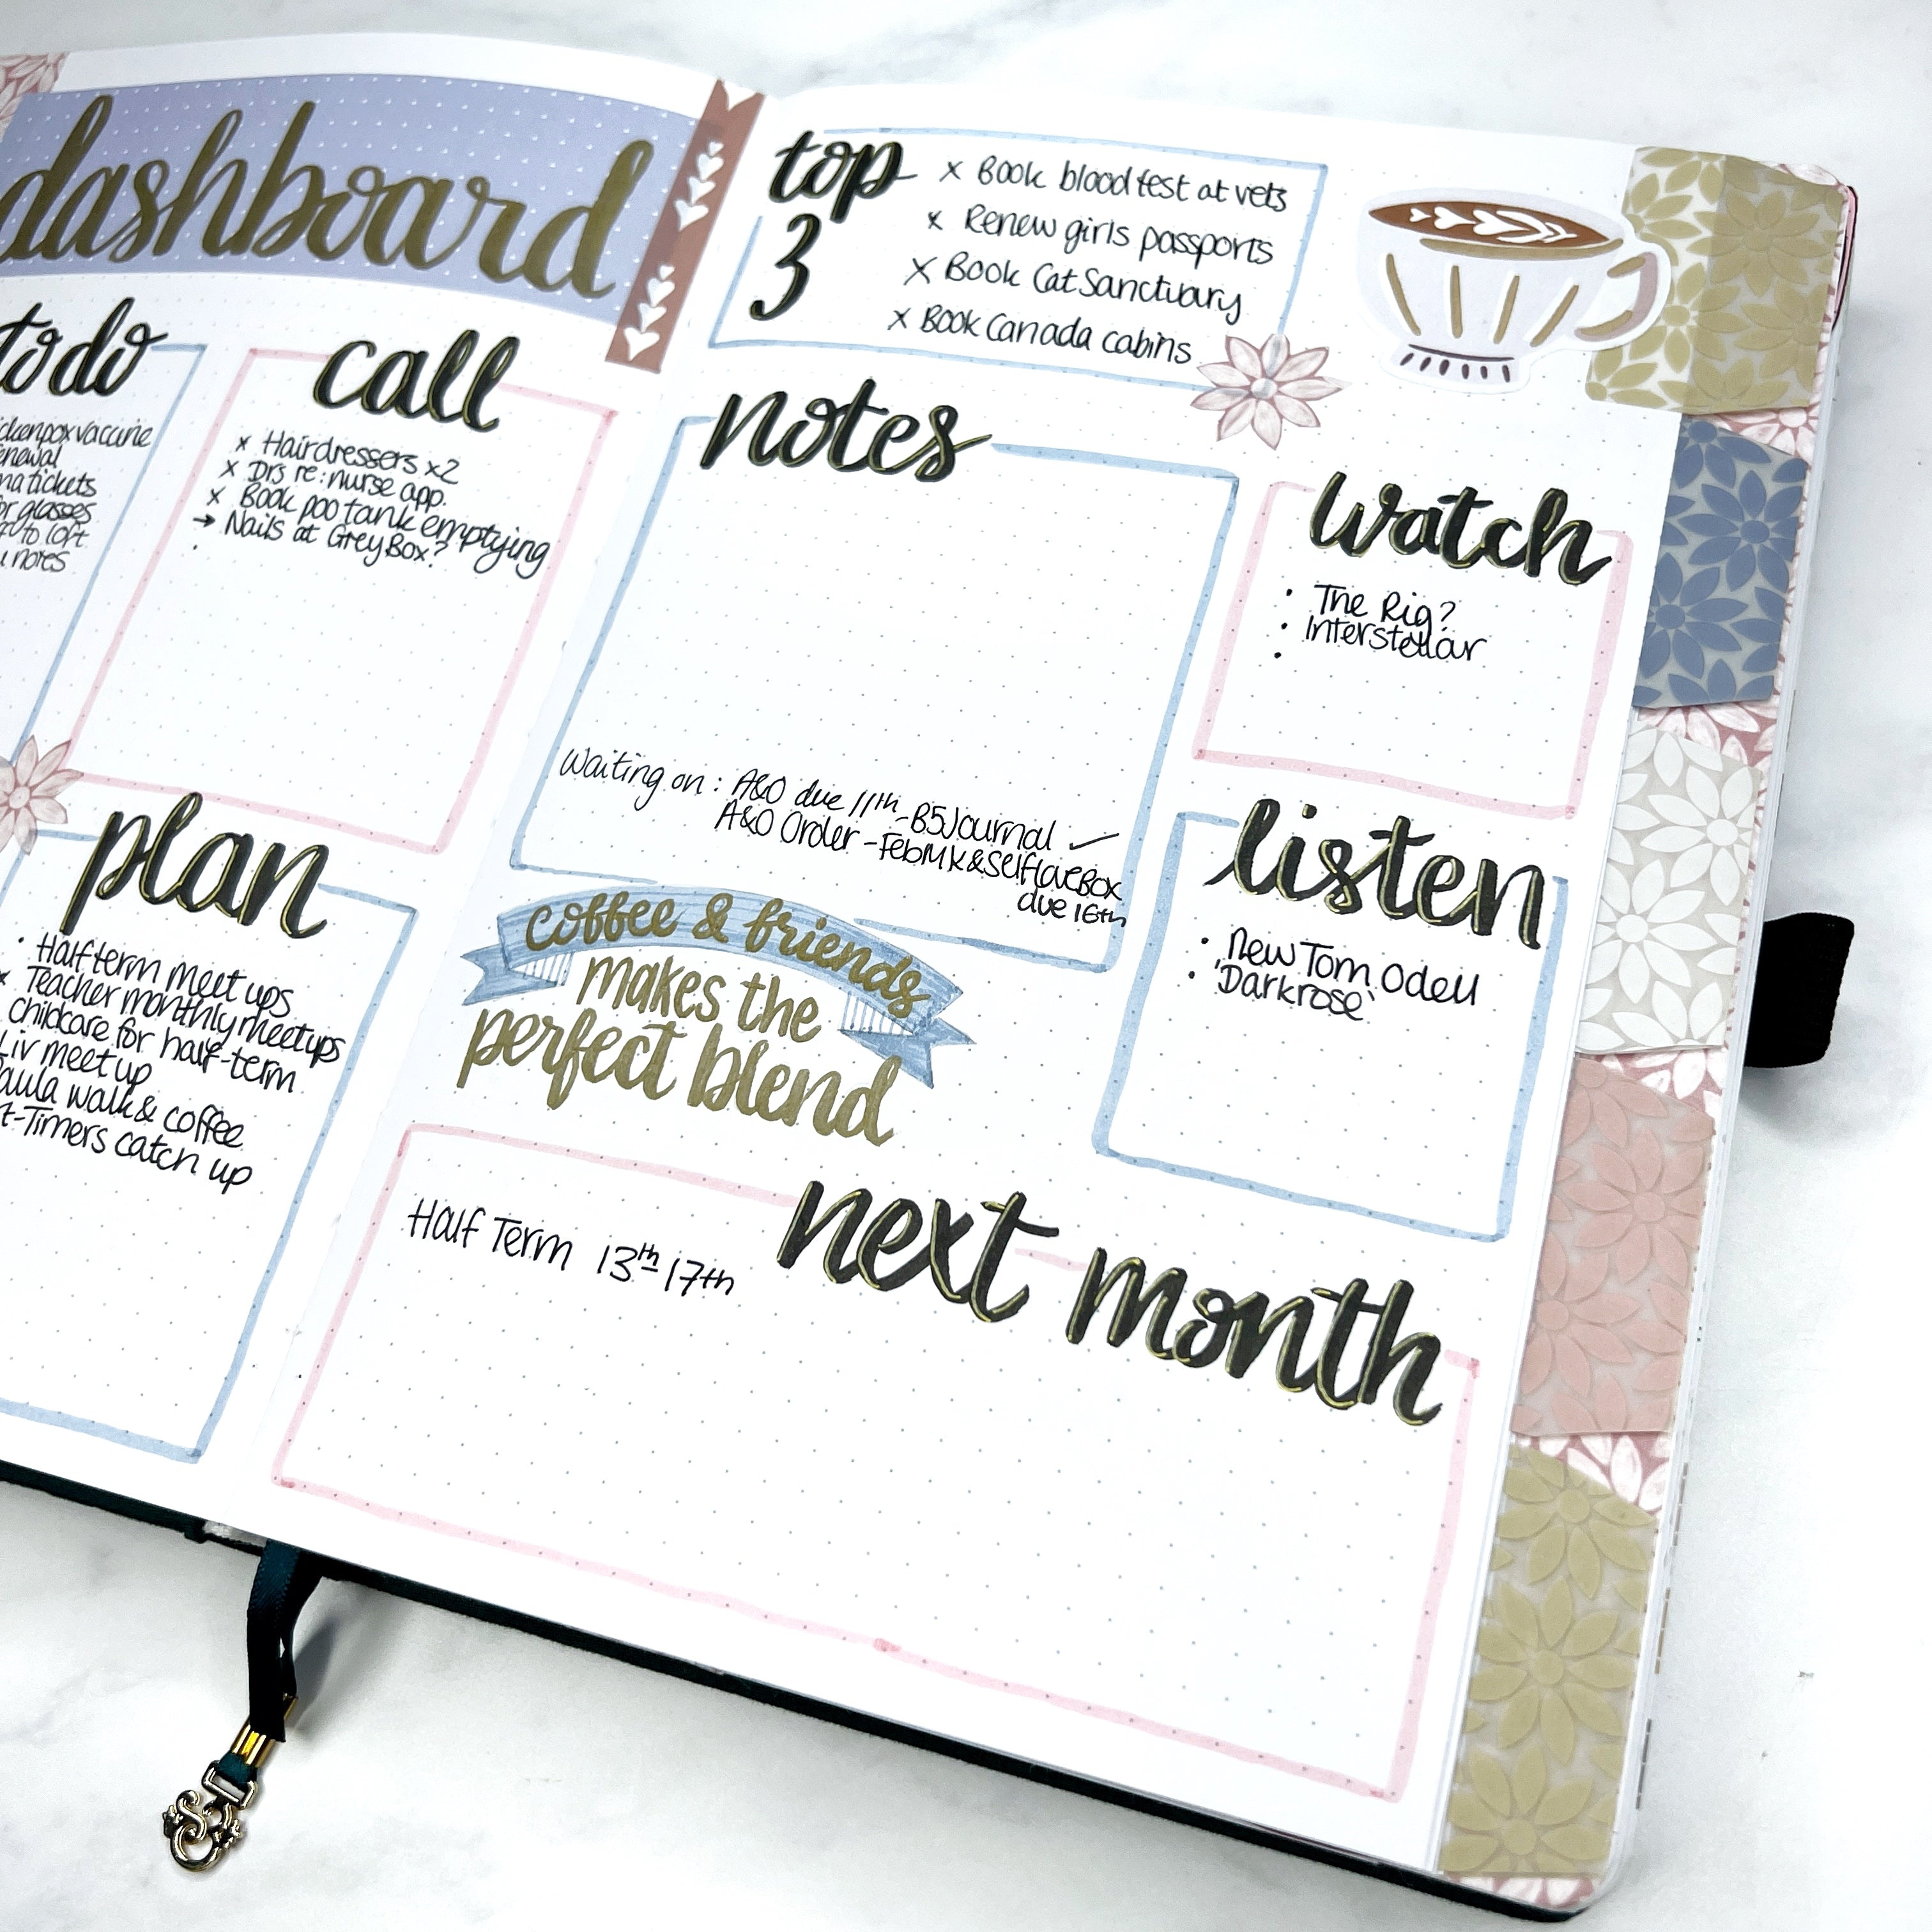 Open journal with to-do list